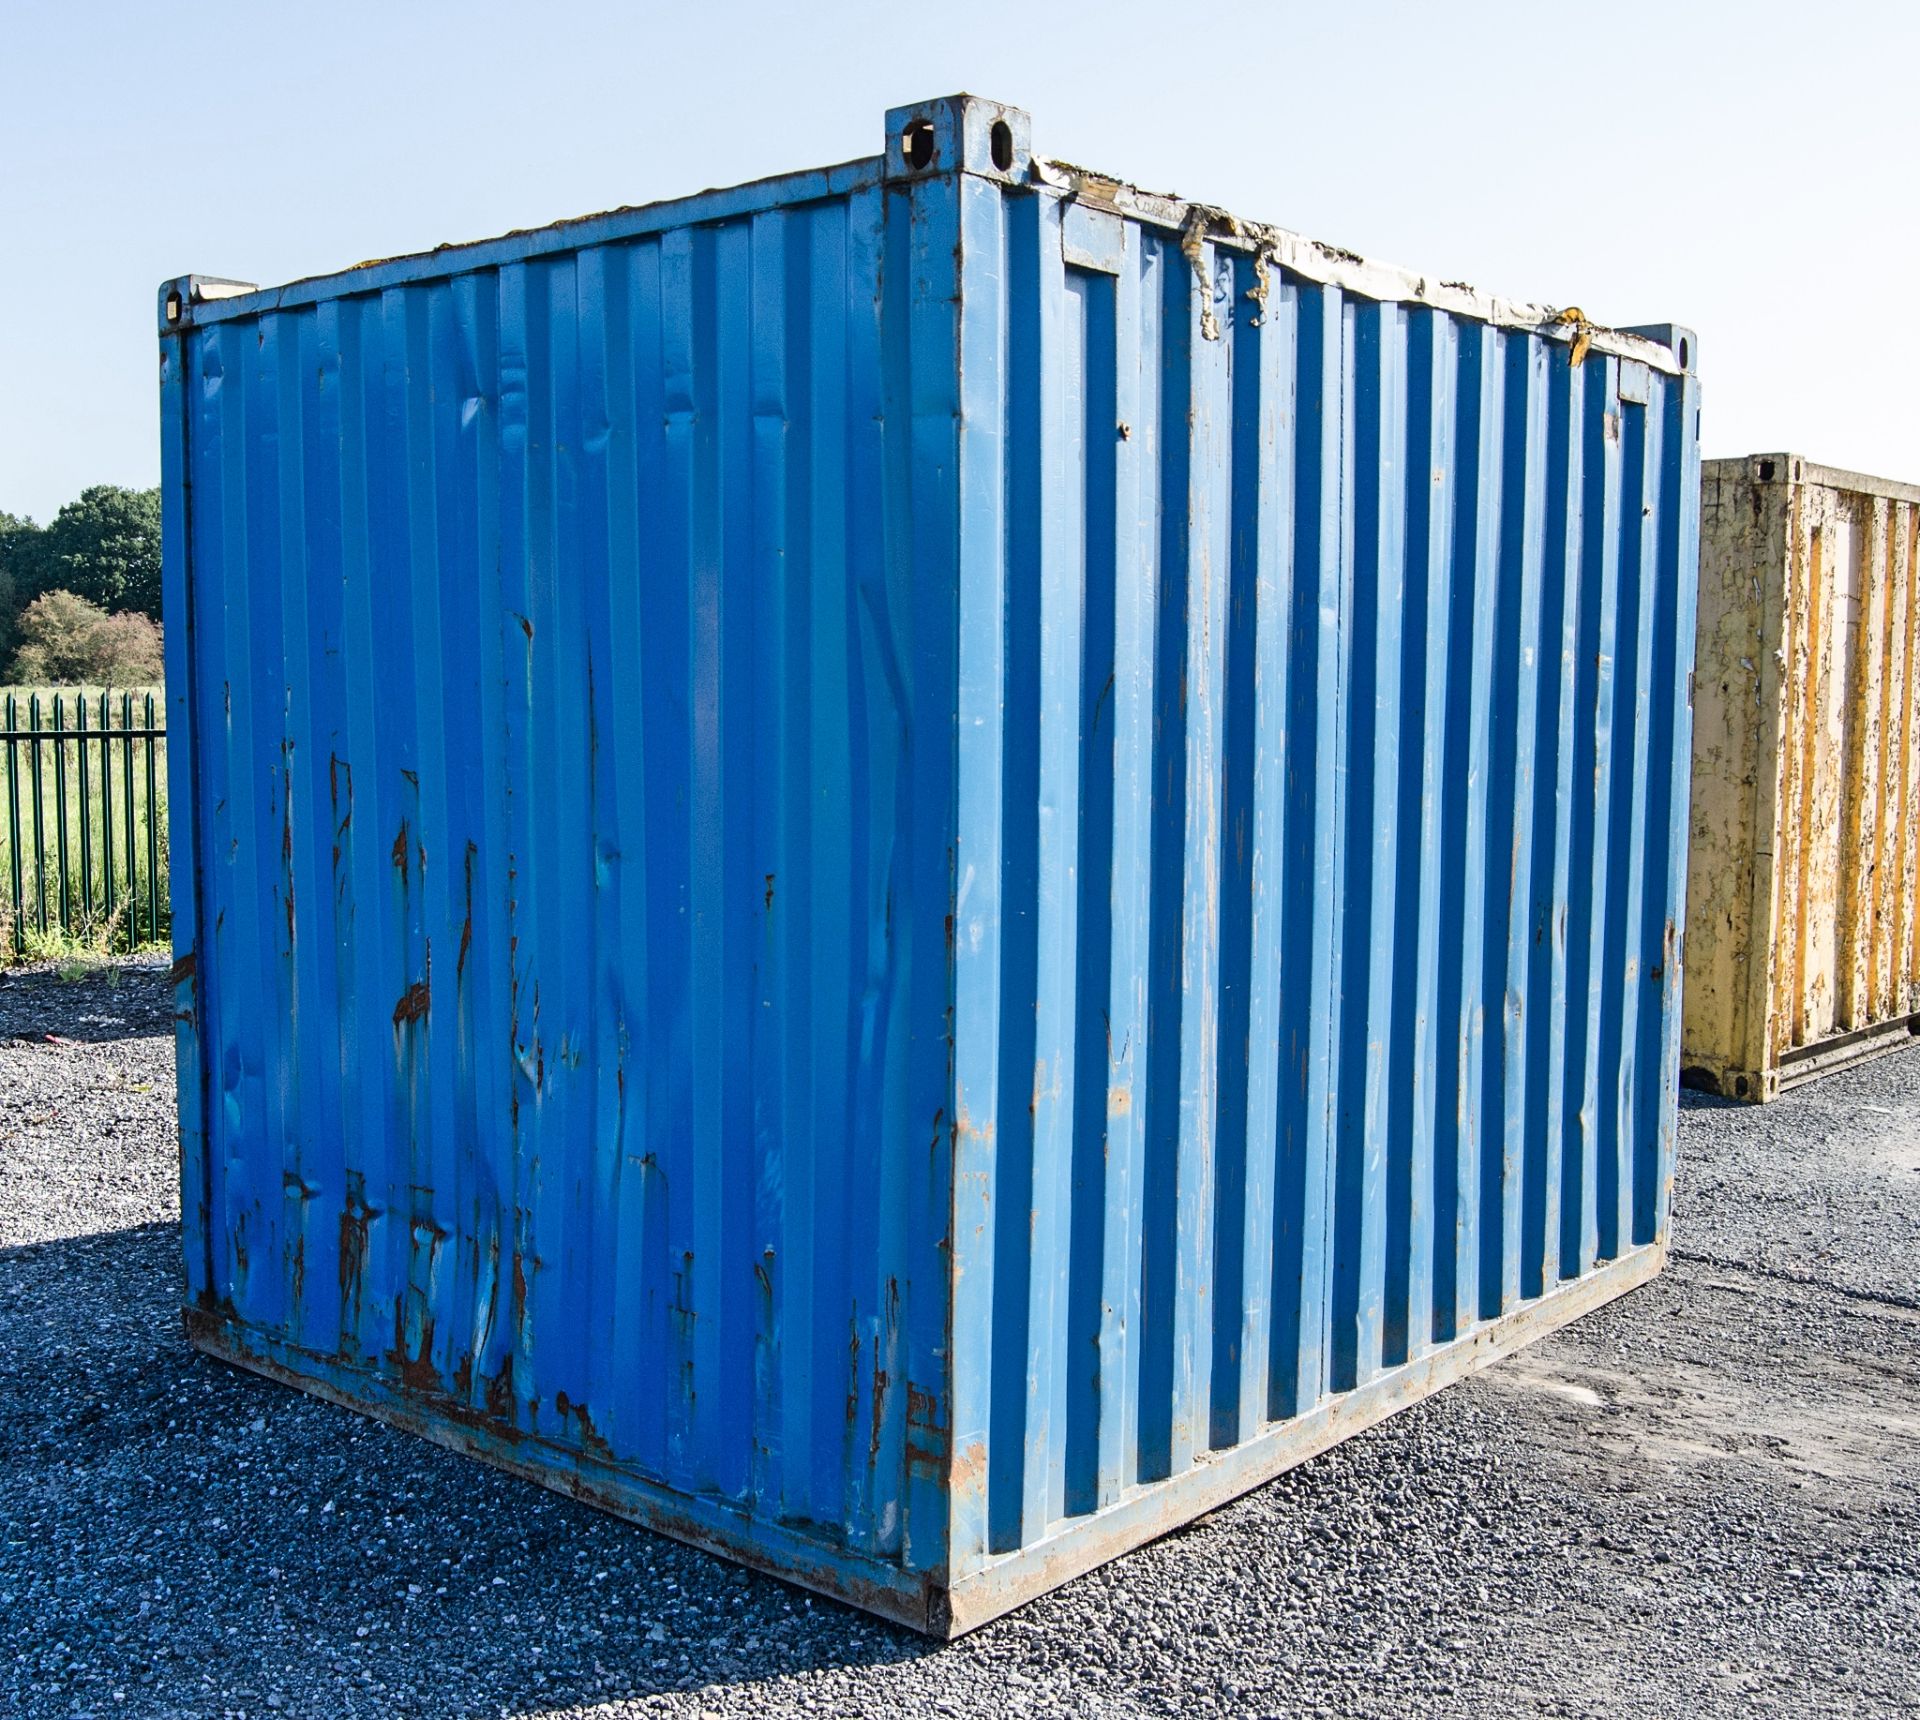 10ft x 8ft steel shipping container - Image 3 of 6